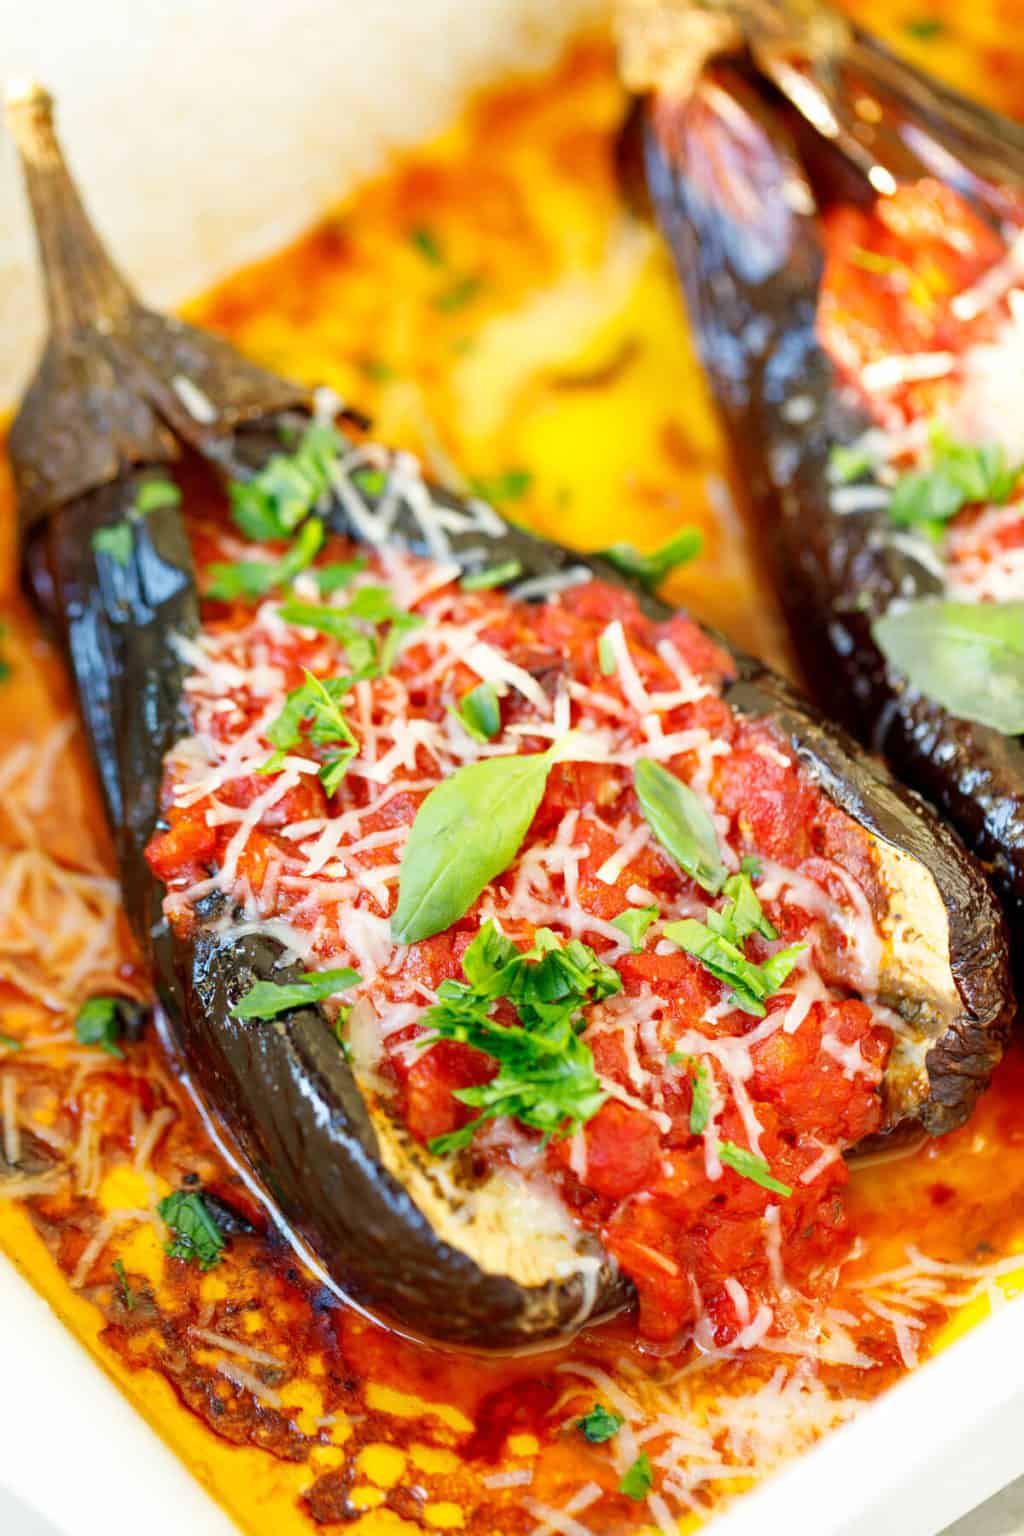 Easy Easy Eggplant Recipe To Make At Home How To Make Perfect Recipes